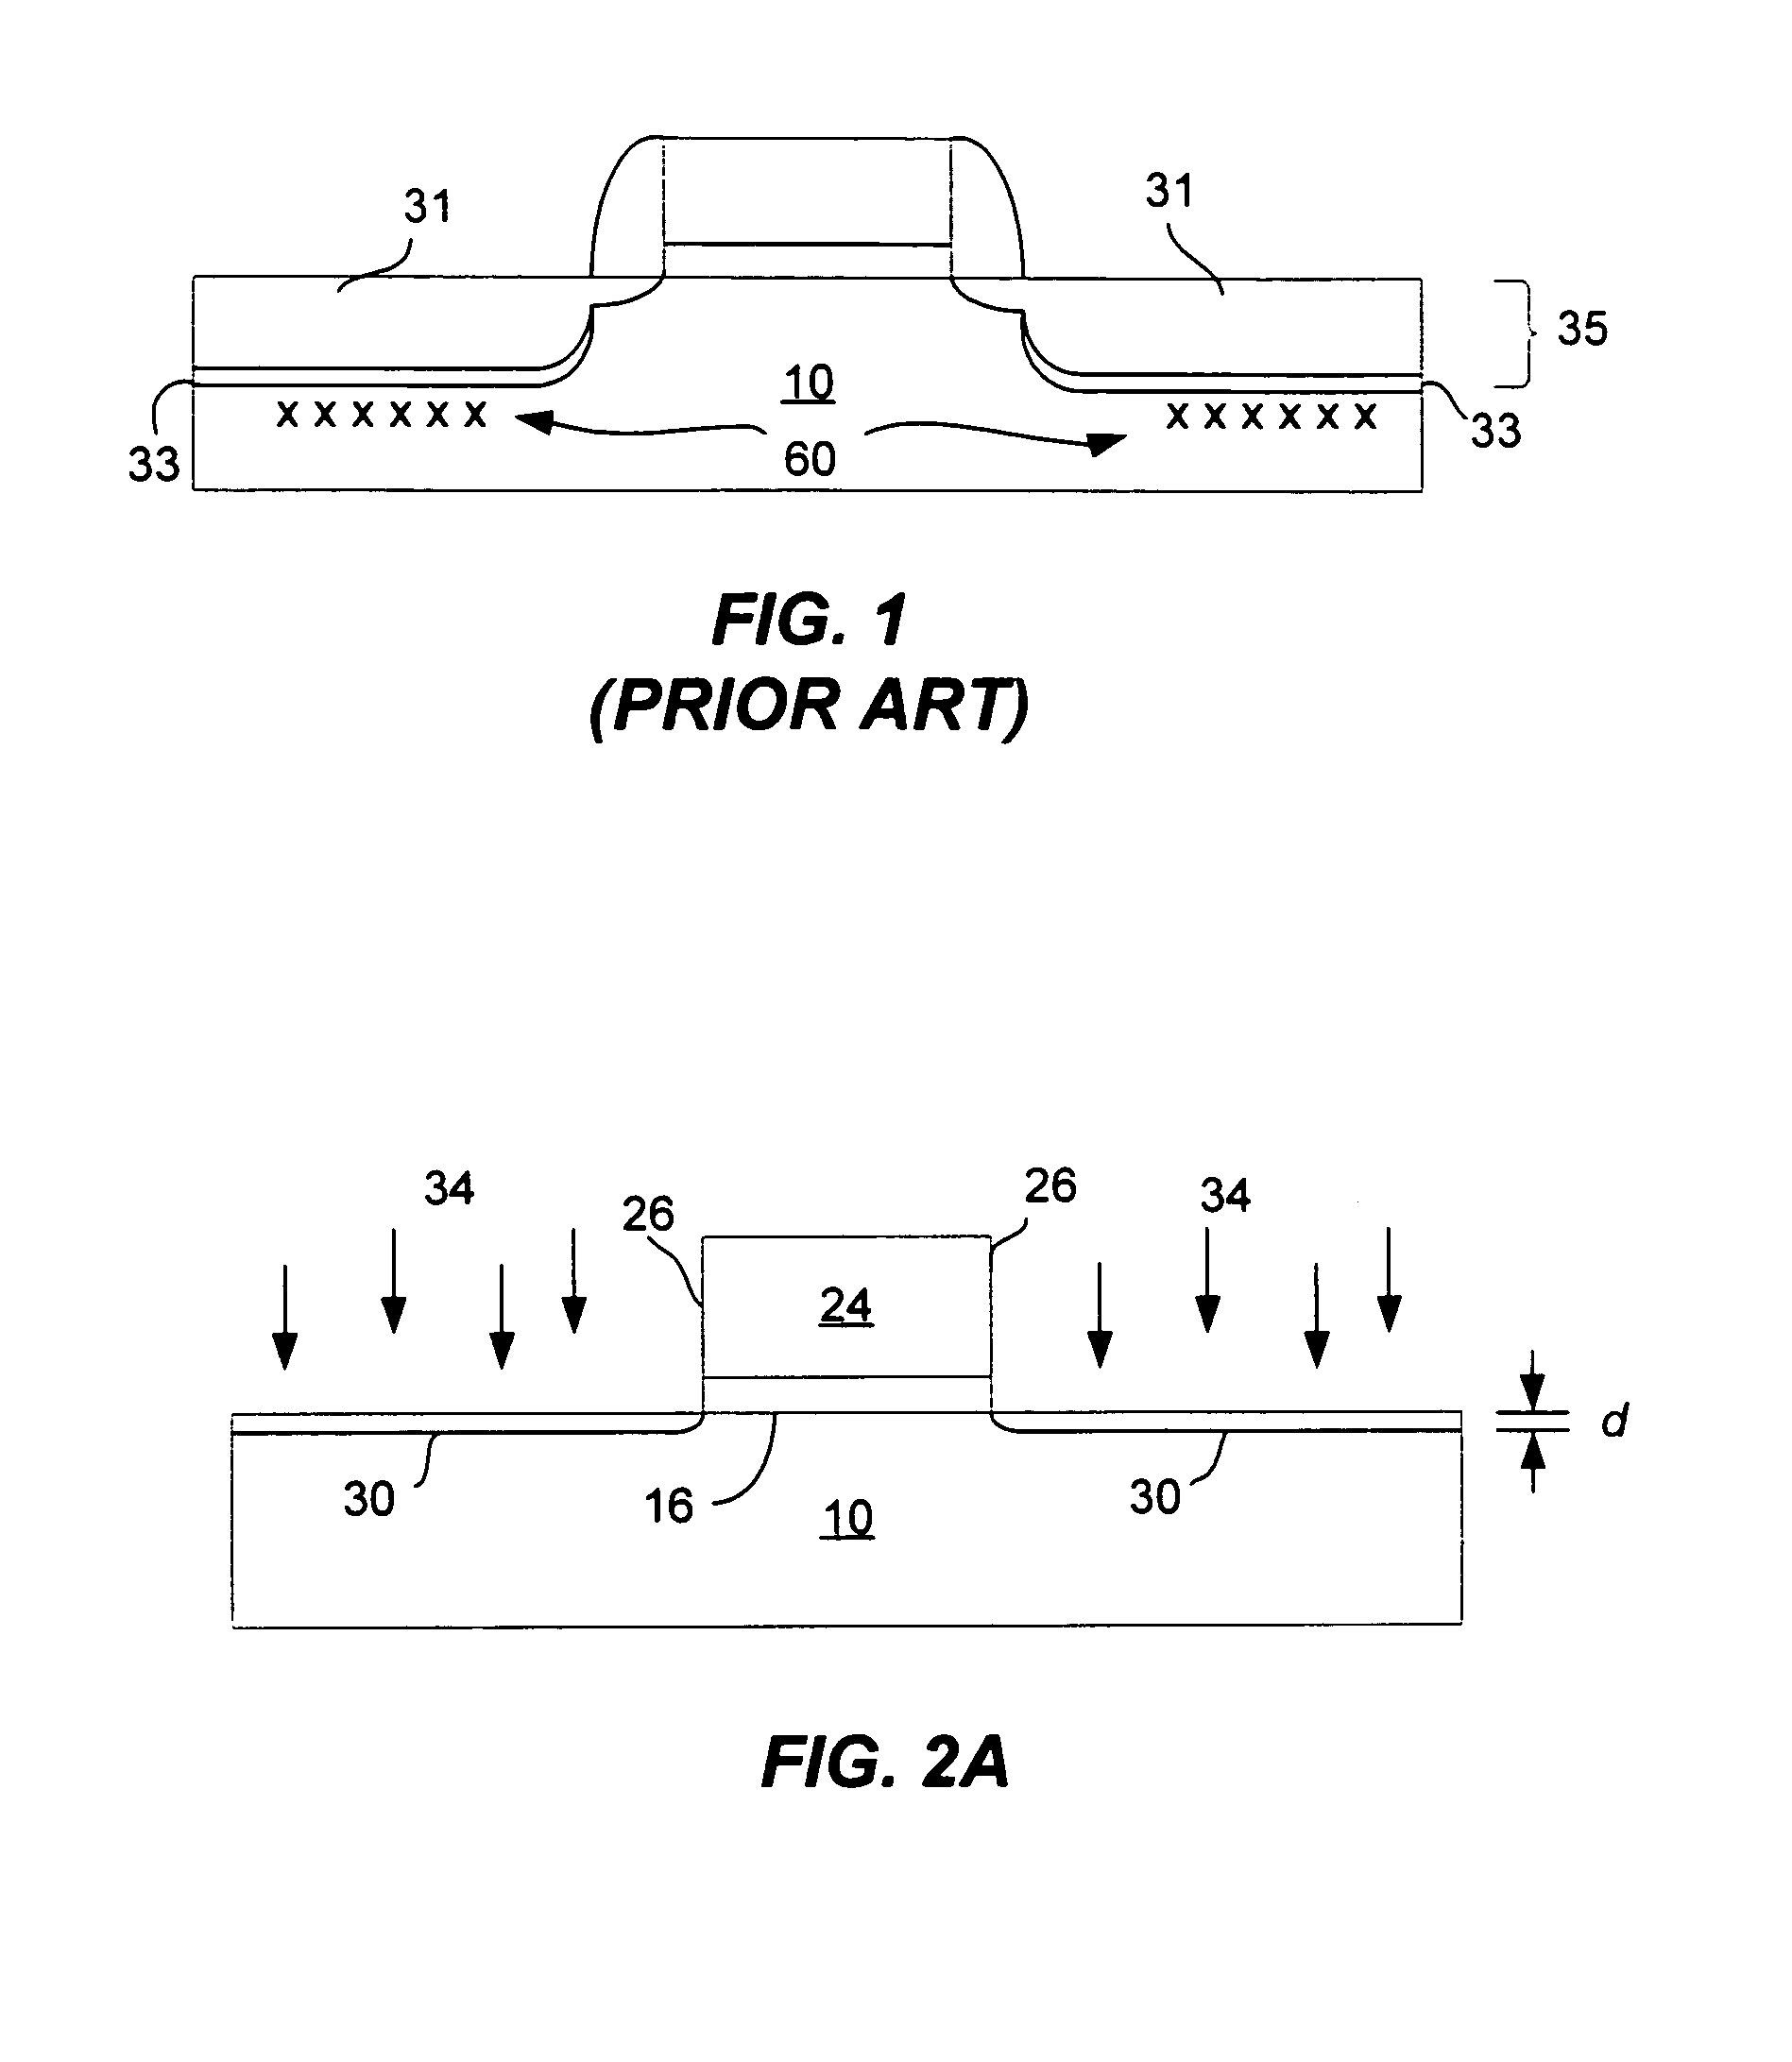 End-of-range defect minimization in semiconductor device